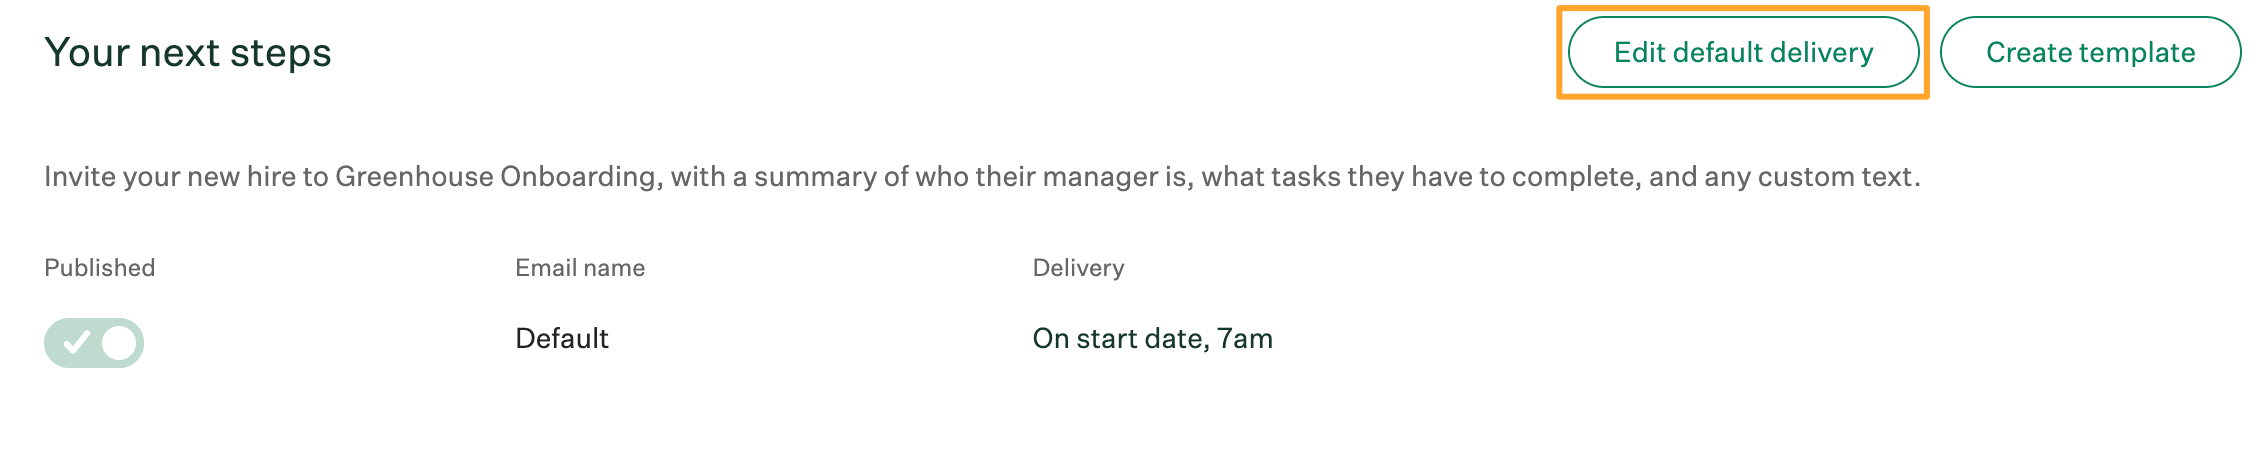 Your next steps section in Greenhouse Onboarding email settings with Edit default delivery button highlighted